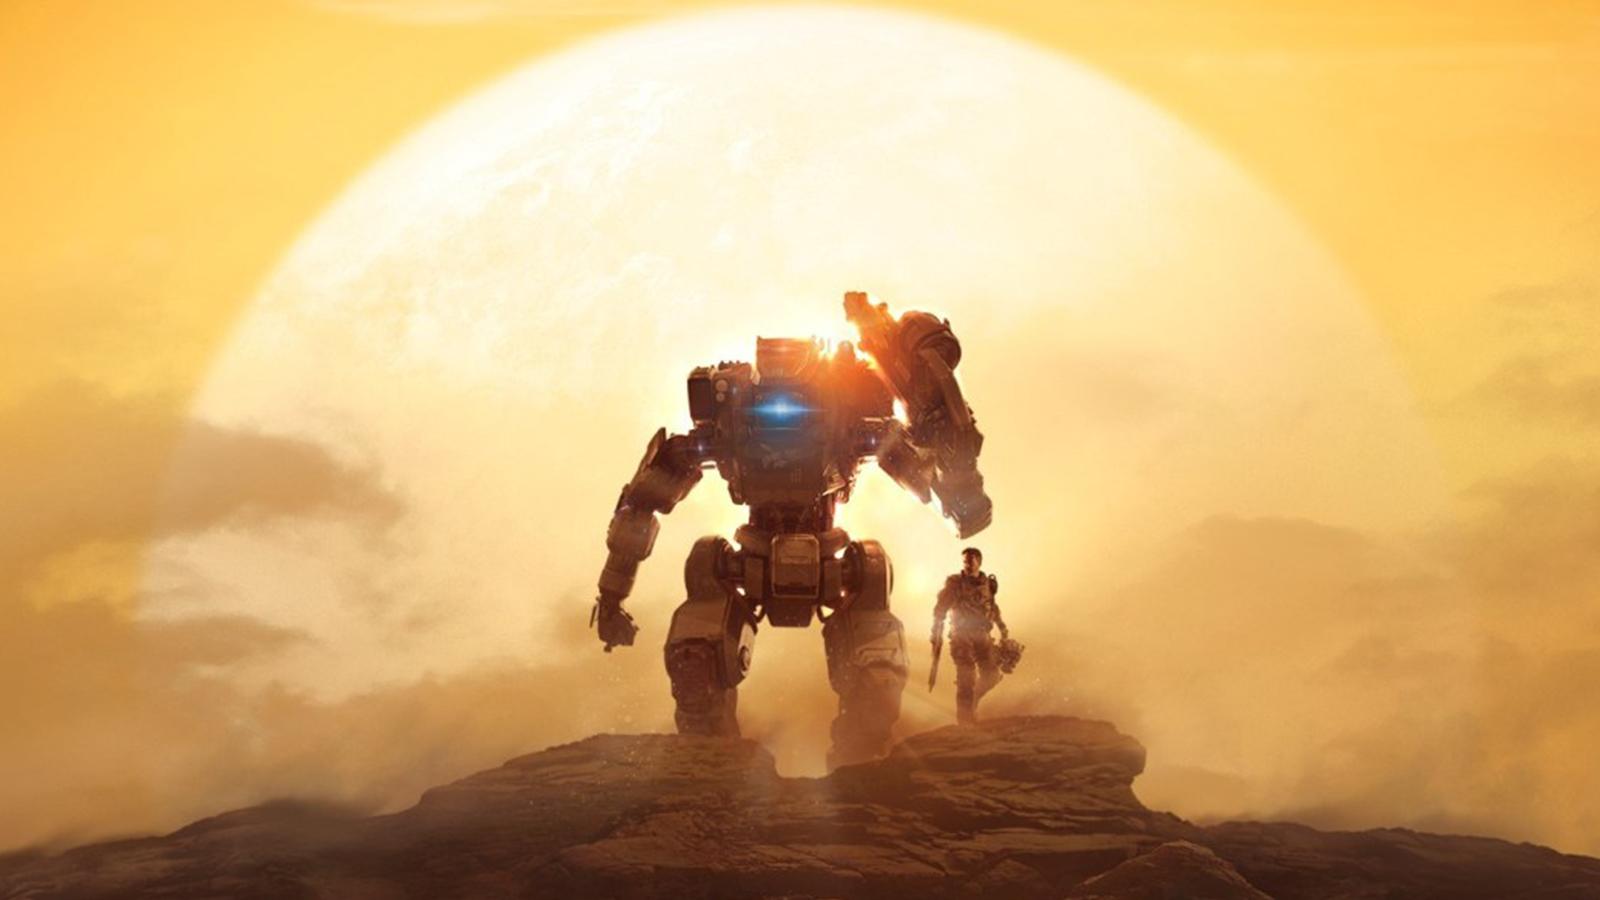 Titanfall 2 Cross-Play Is Unlikely but Not Impossible, Says Director